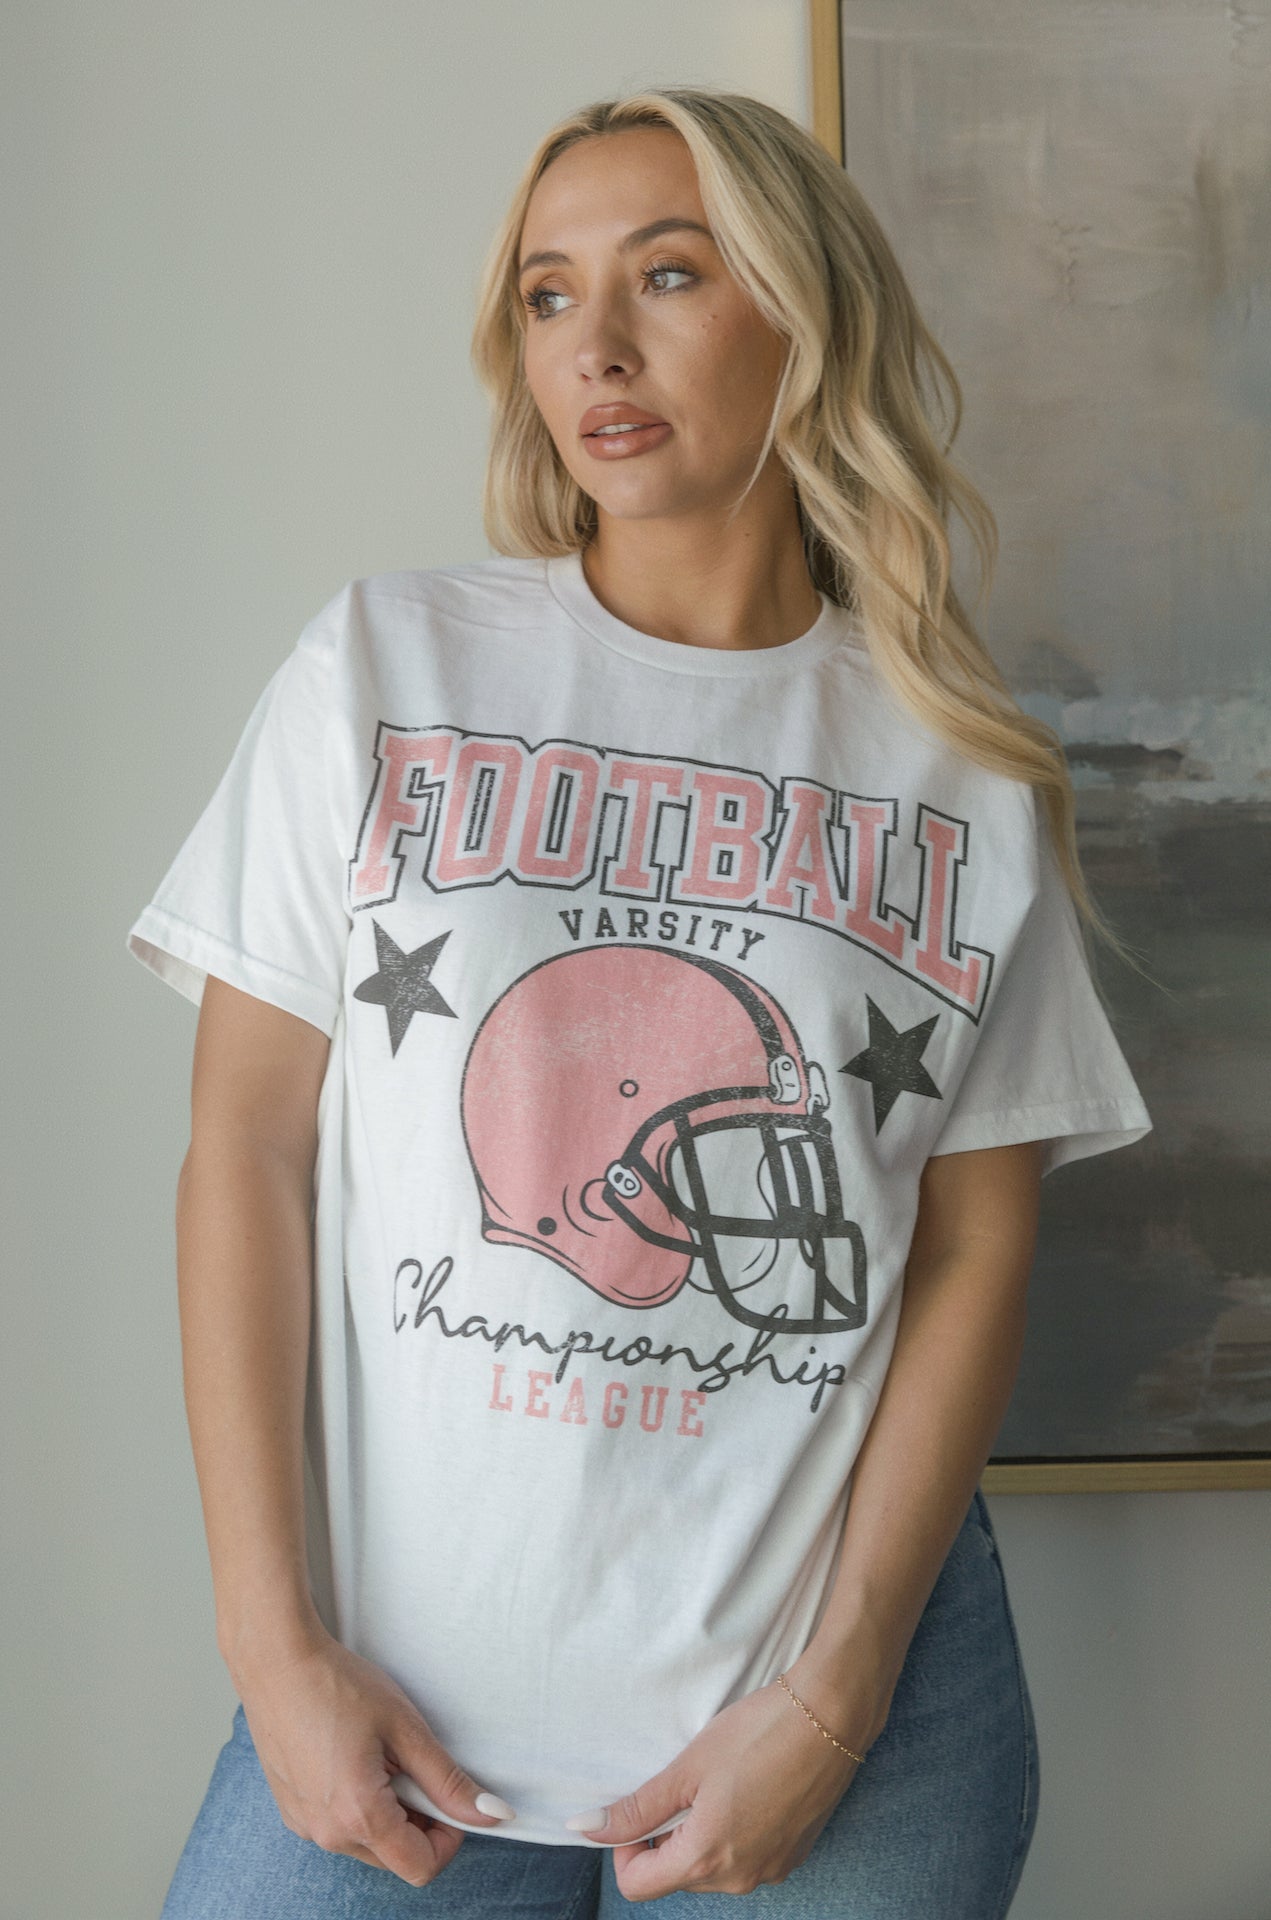 white football graphic tee with a pink football helmet design and football varsity champion league graphic